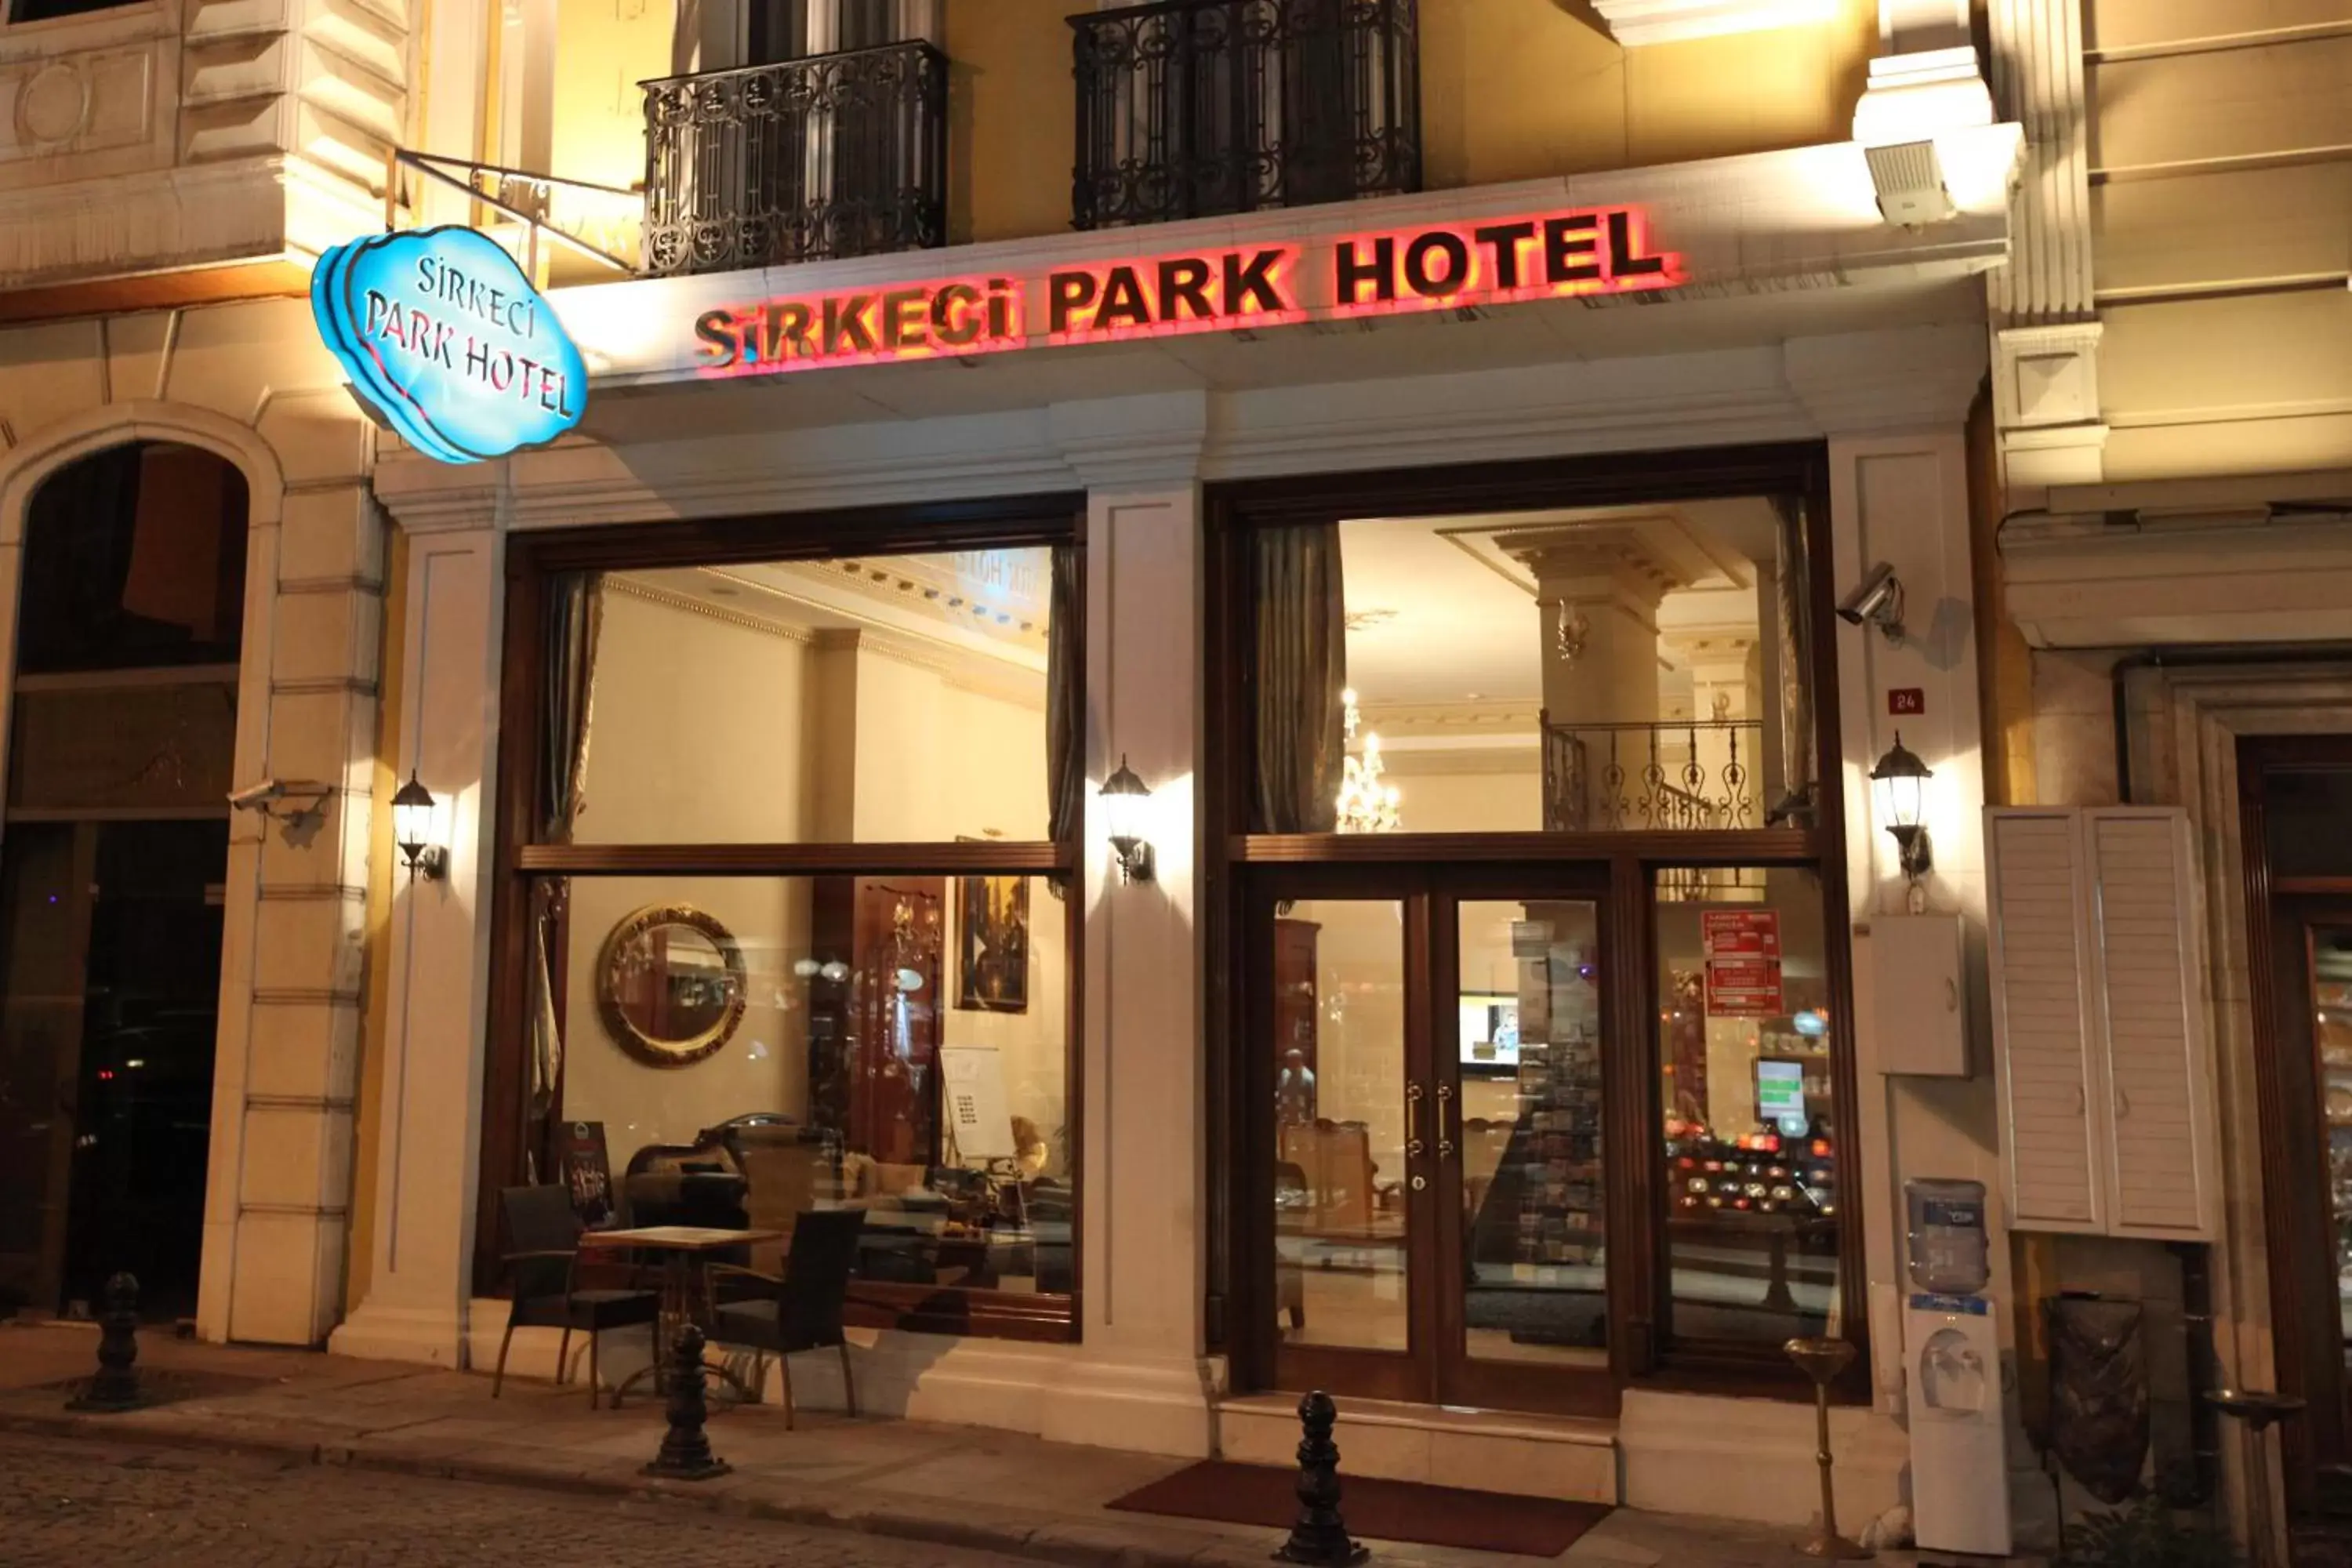 Property building in Sirkeci Park Hotel